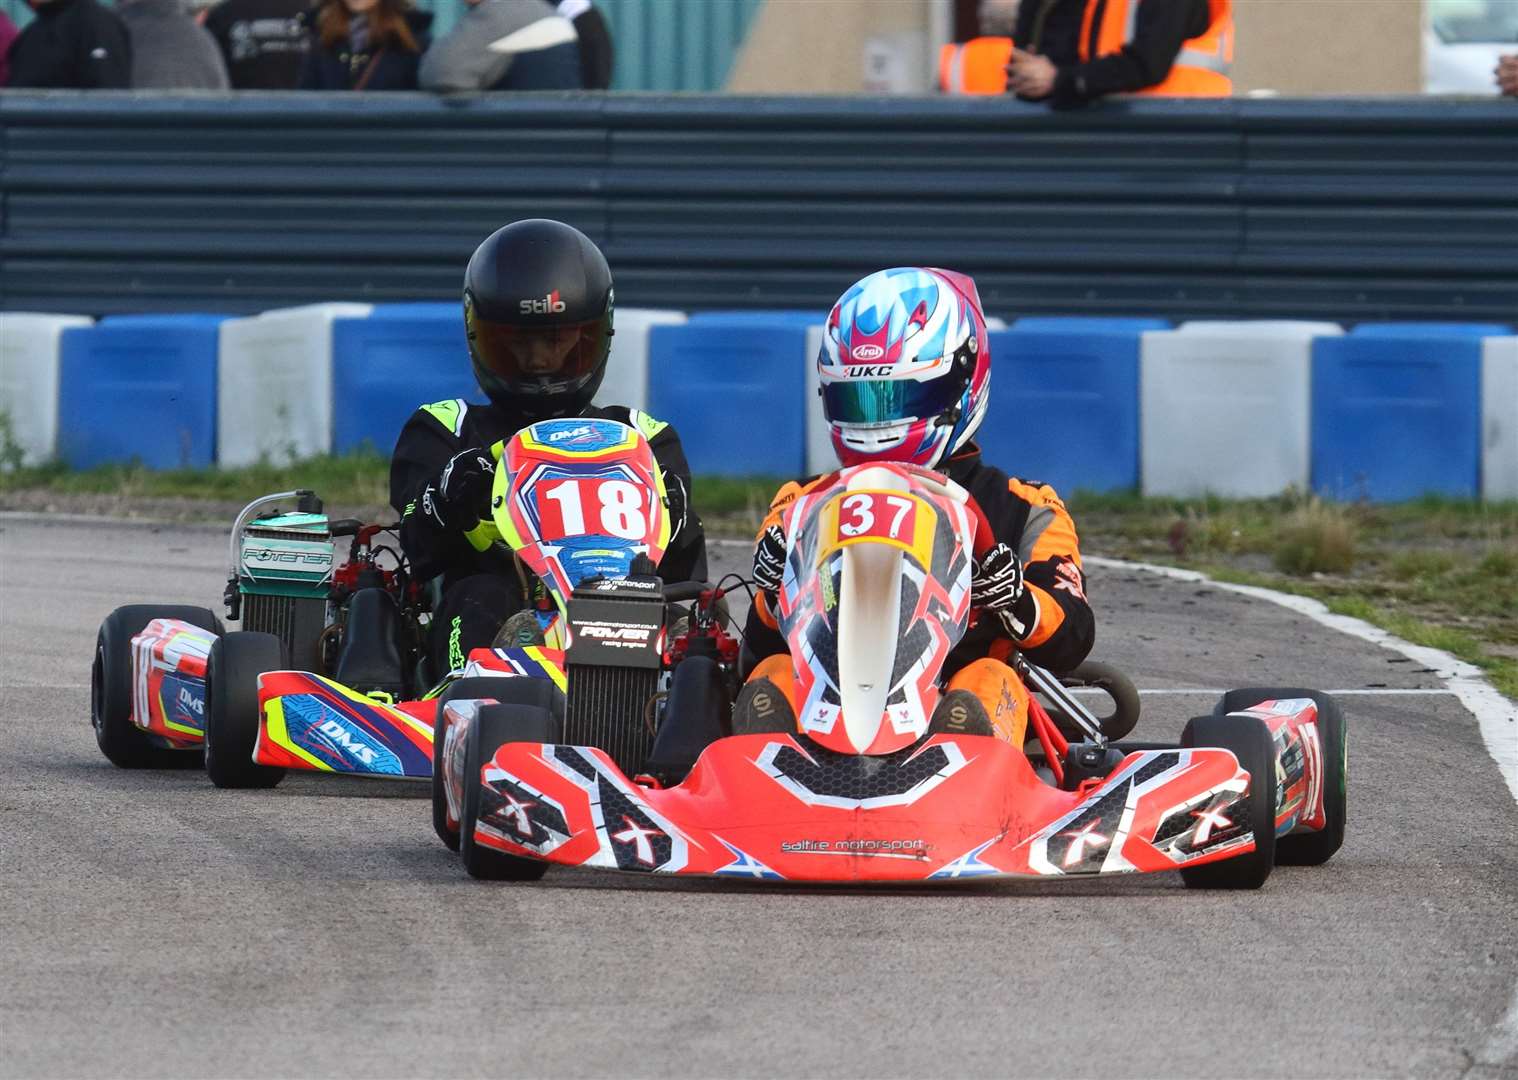 Reece Duthie leads from Craig Stephen in the Jnr Max. Picture: David Porter